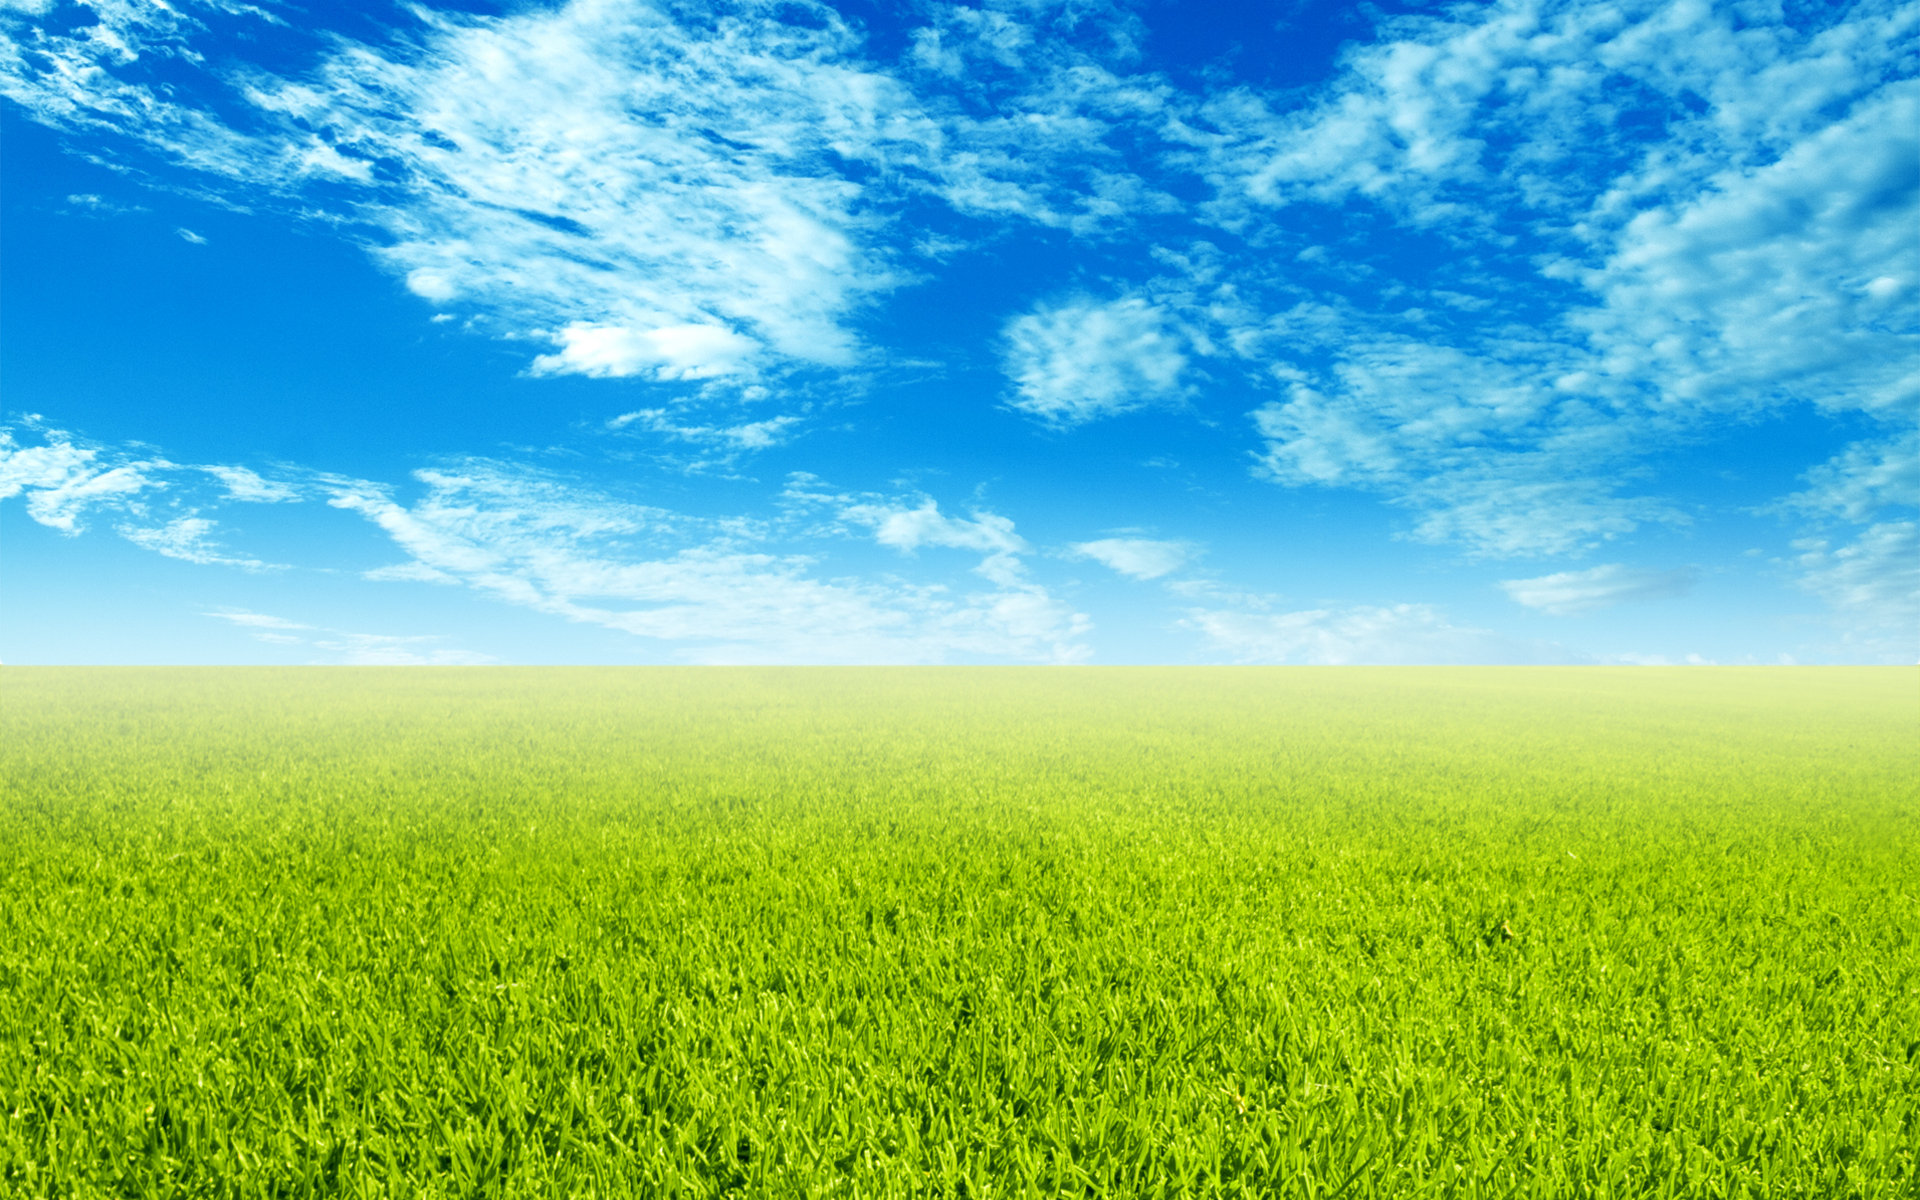 Grass sky 14612 - Green sky - Landscape scenery. Download Grass sky 14612 - Green sky - Landscape scenery wallpaper, Grass sky high-definition picture, ...